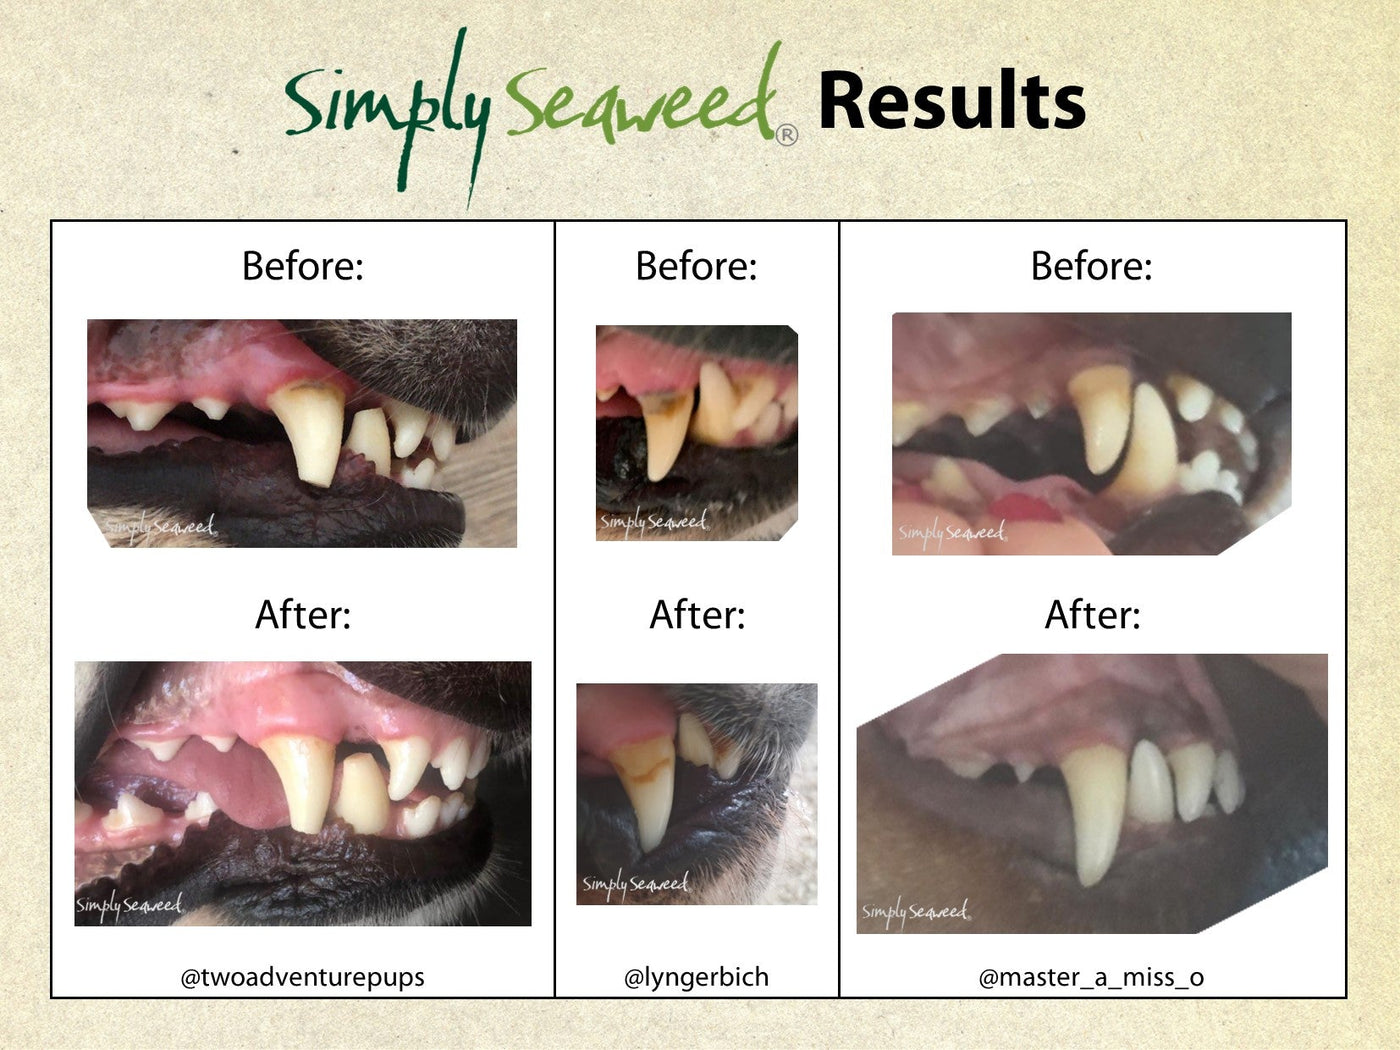 Simply Seaweed Organic Dental Health Care for Cats & Dogs